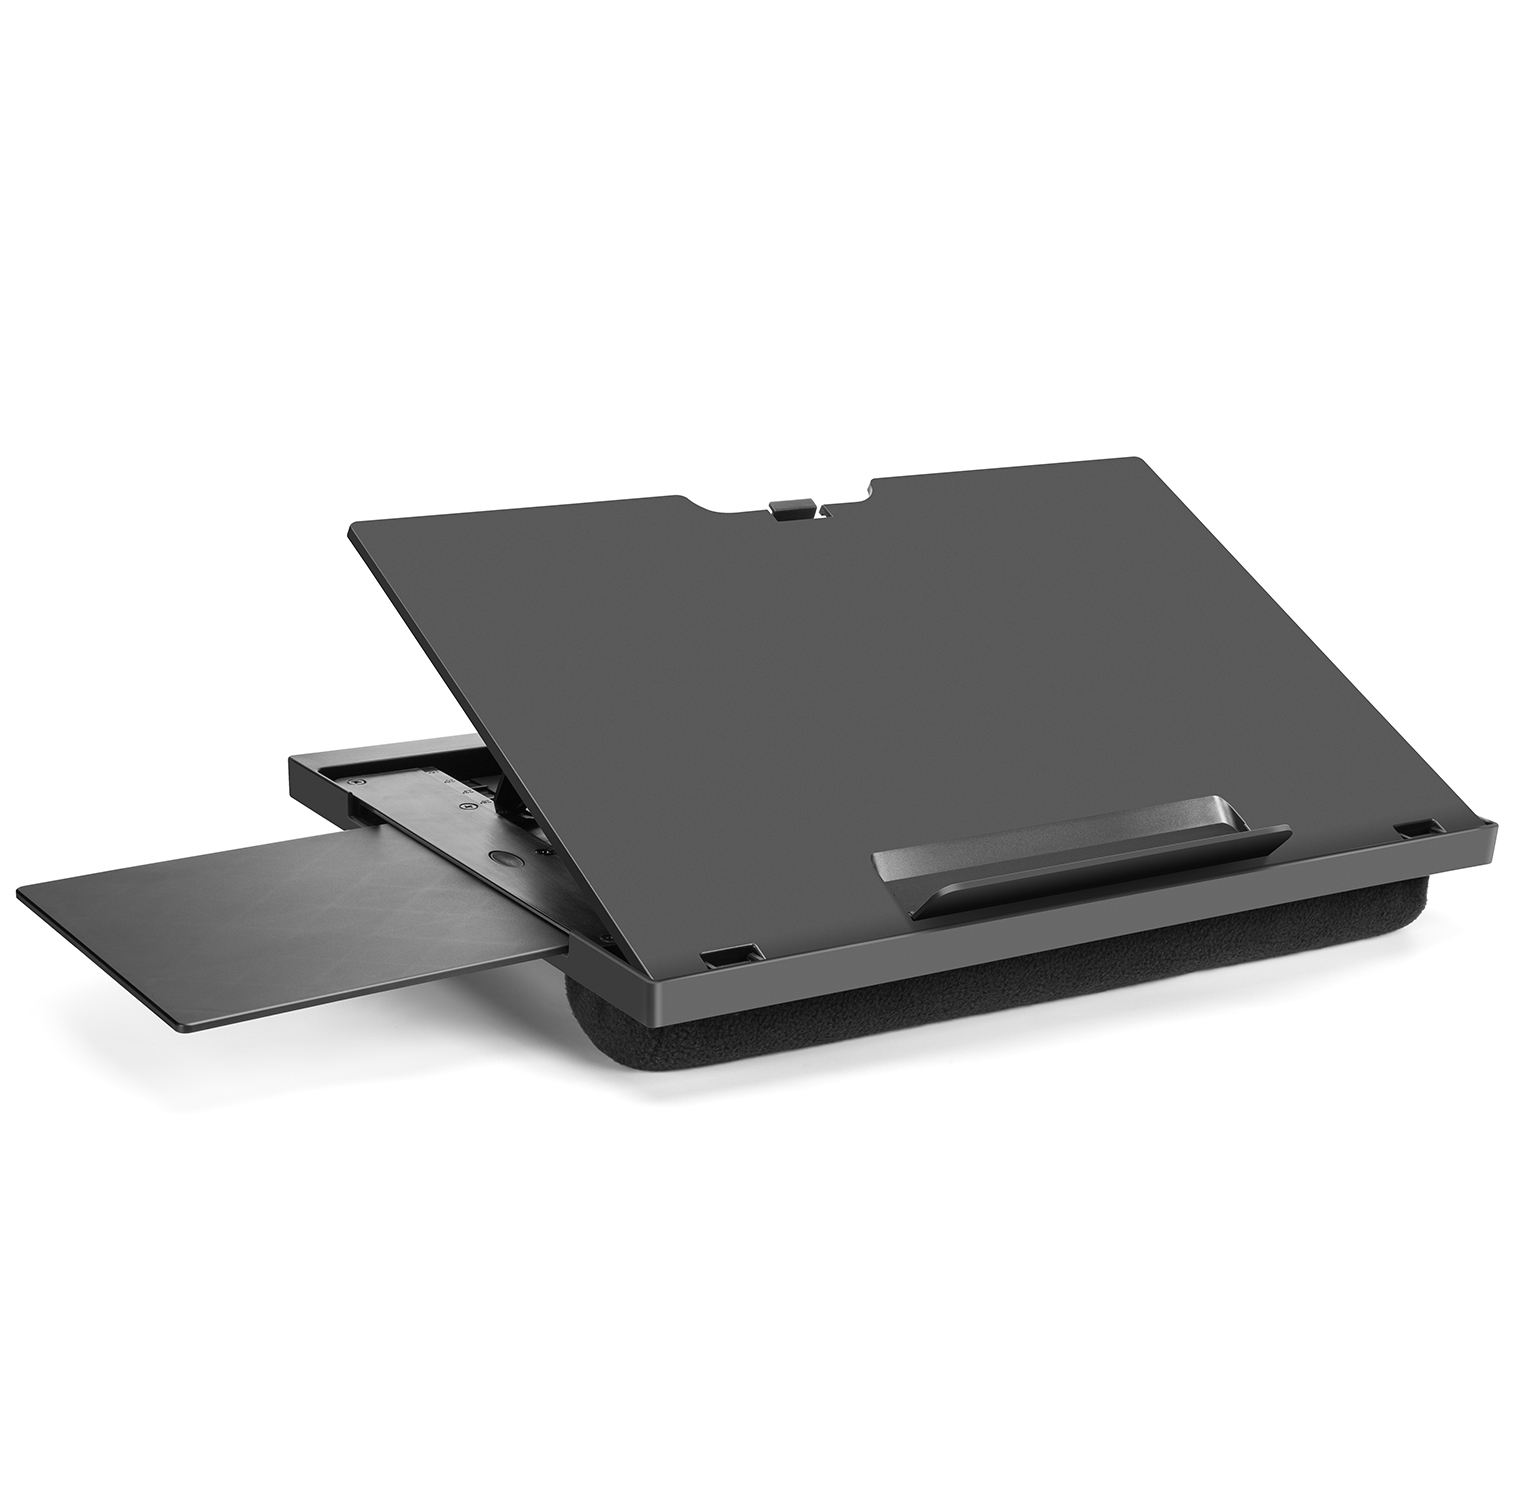 Adjustable Laptop Lap Desk Fits up to 15.6" with 6 Adjustable Angles, Detachable Mouse Pad, & Dual Cushions - image 8 of 8